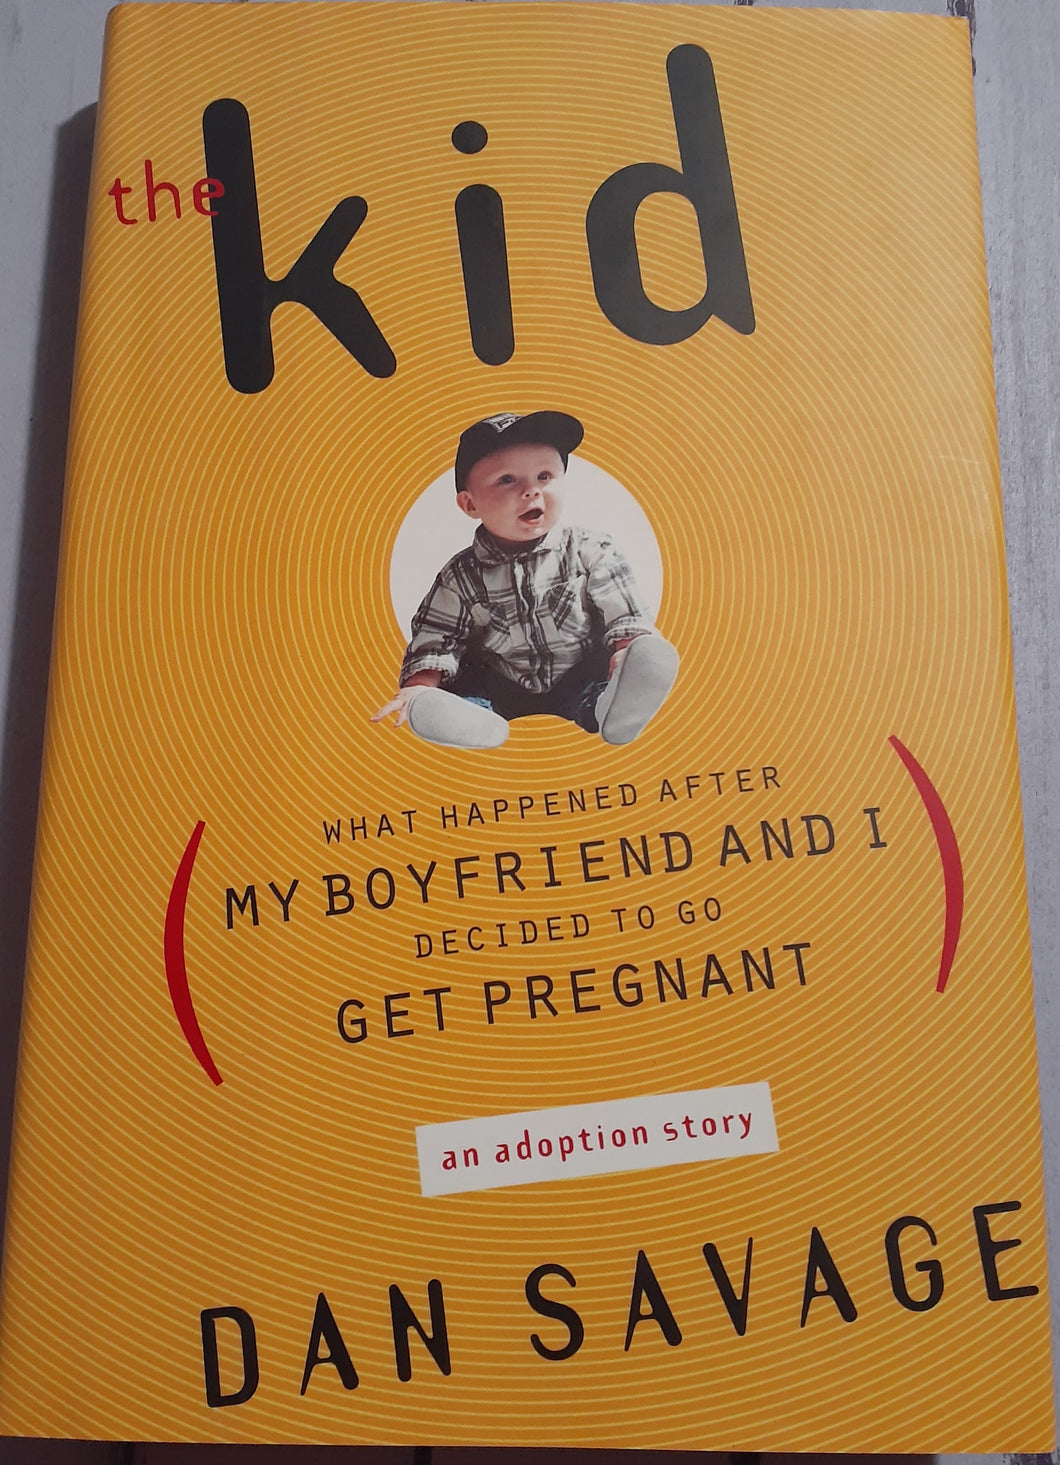 The Kid: What Happened After My Boyfriend and I Decided to Go Get Pregnant